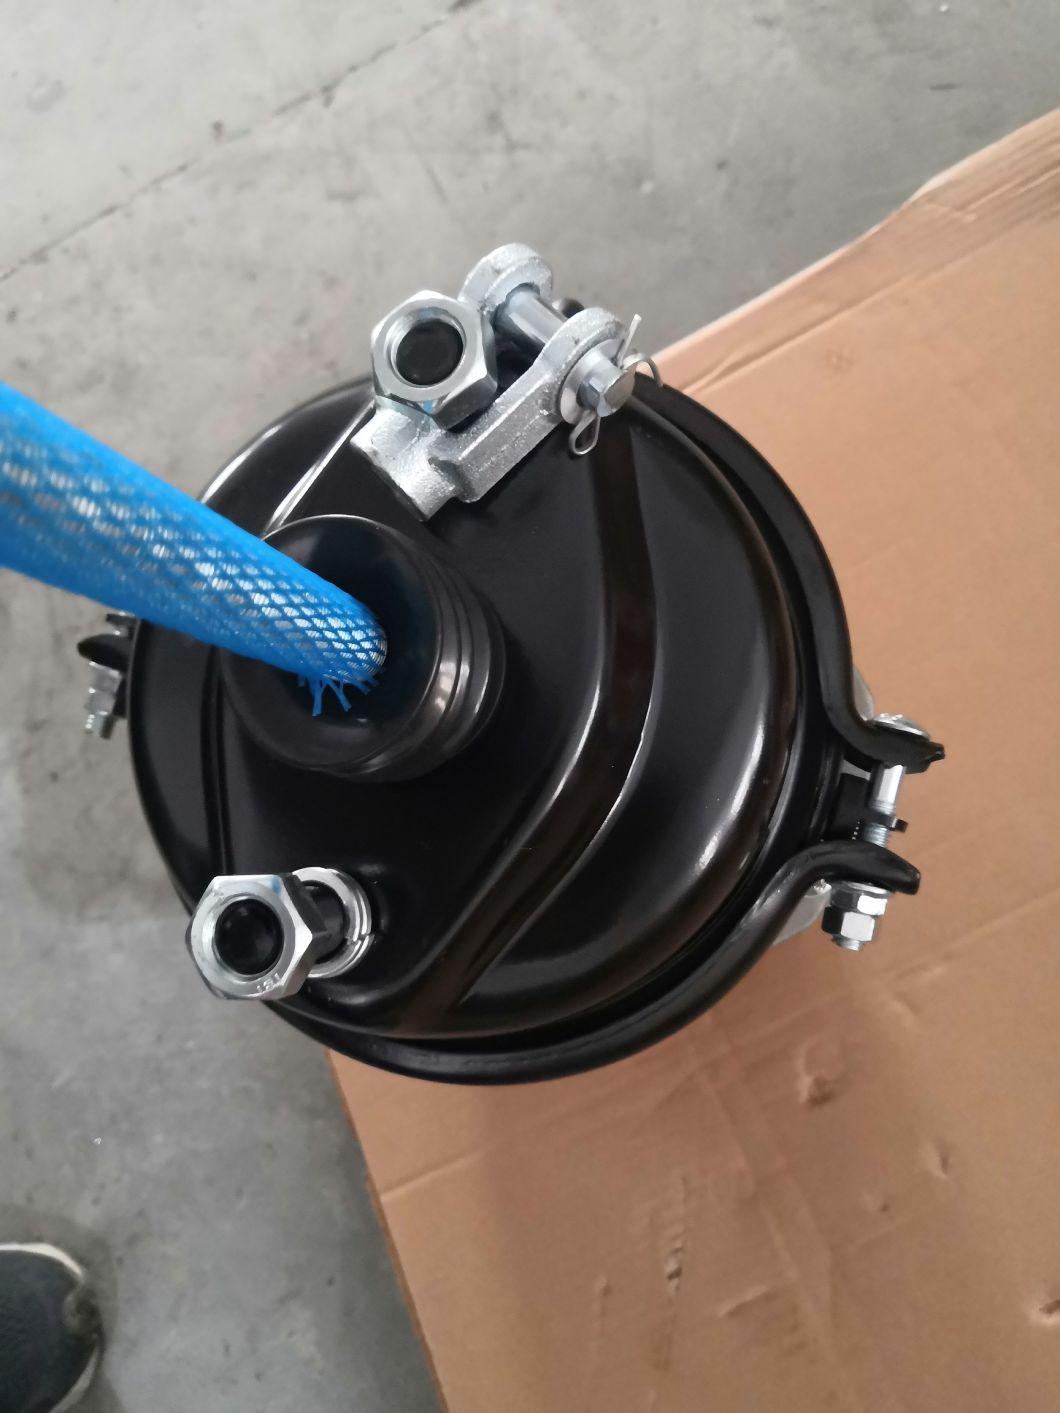 Good Quality Brake Chamber for Heavy Duty Truck Scania, Volvo and Benz for Sale